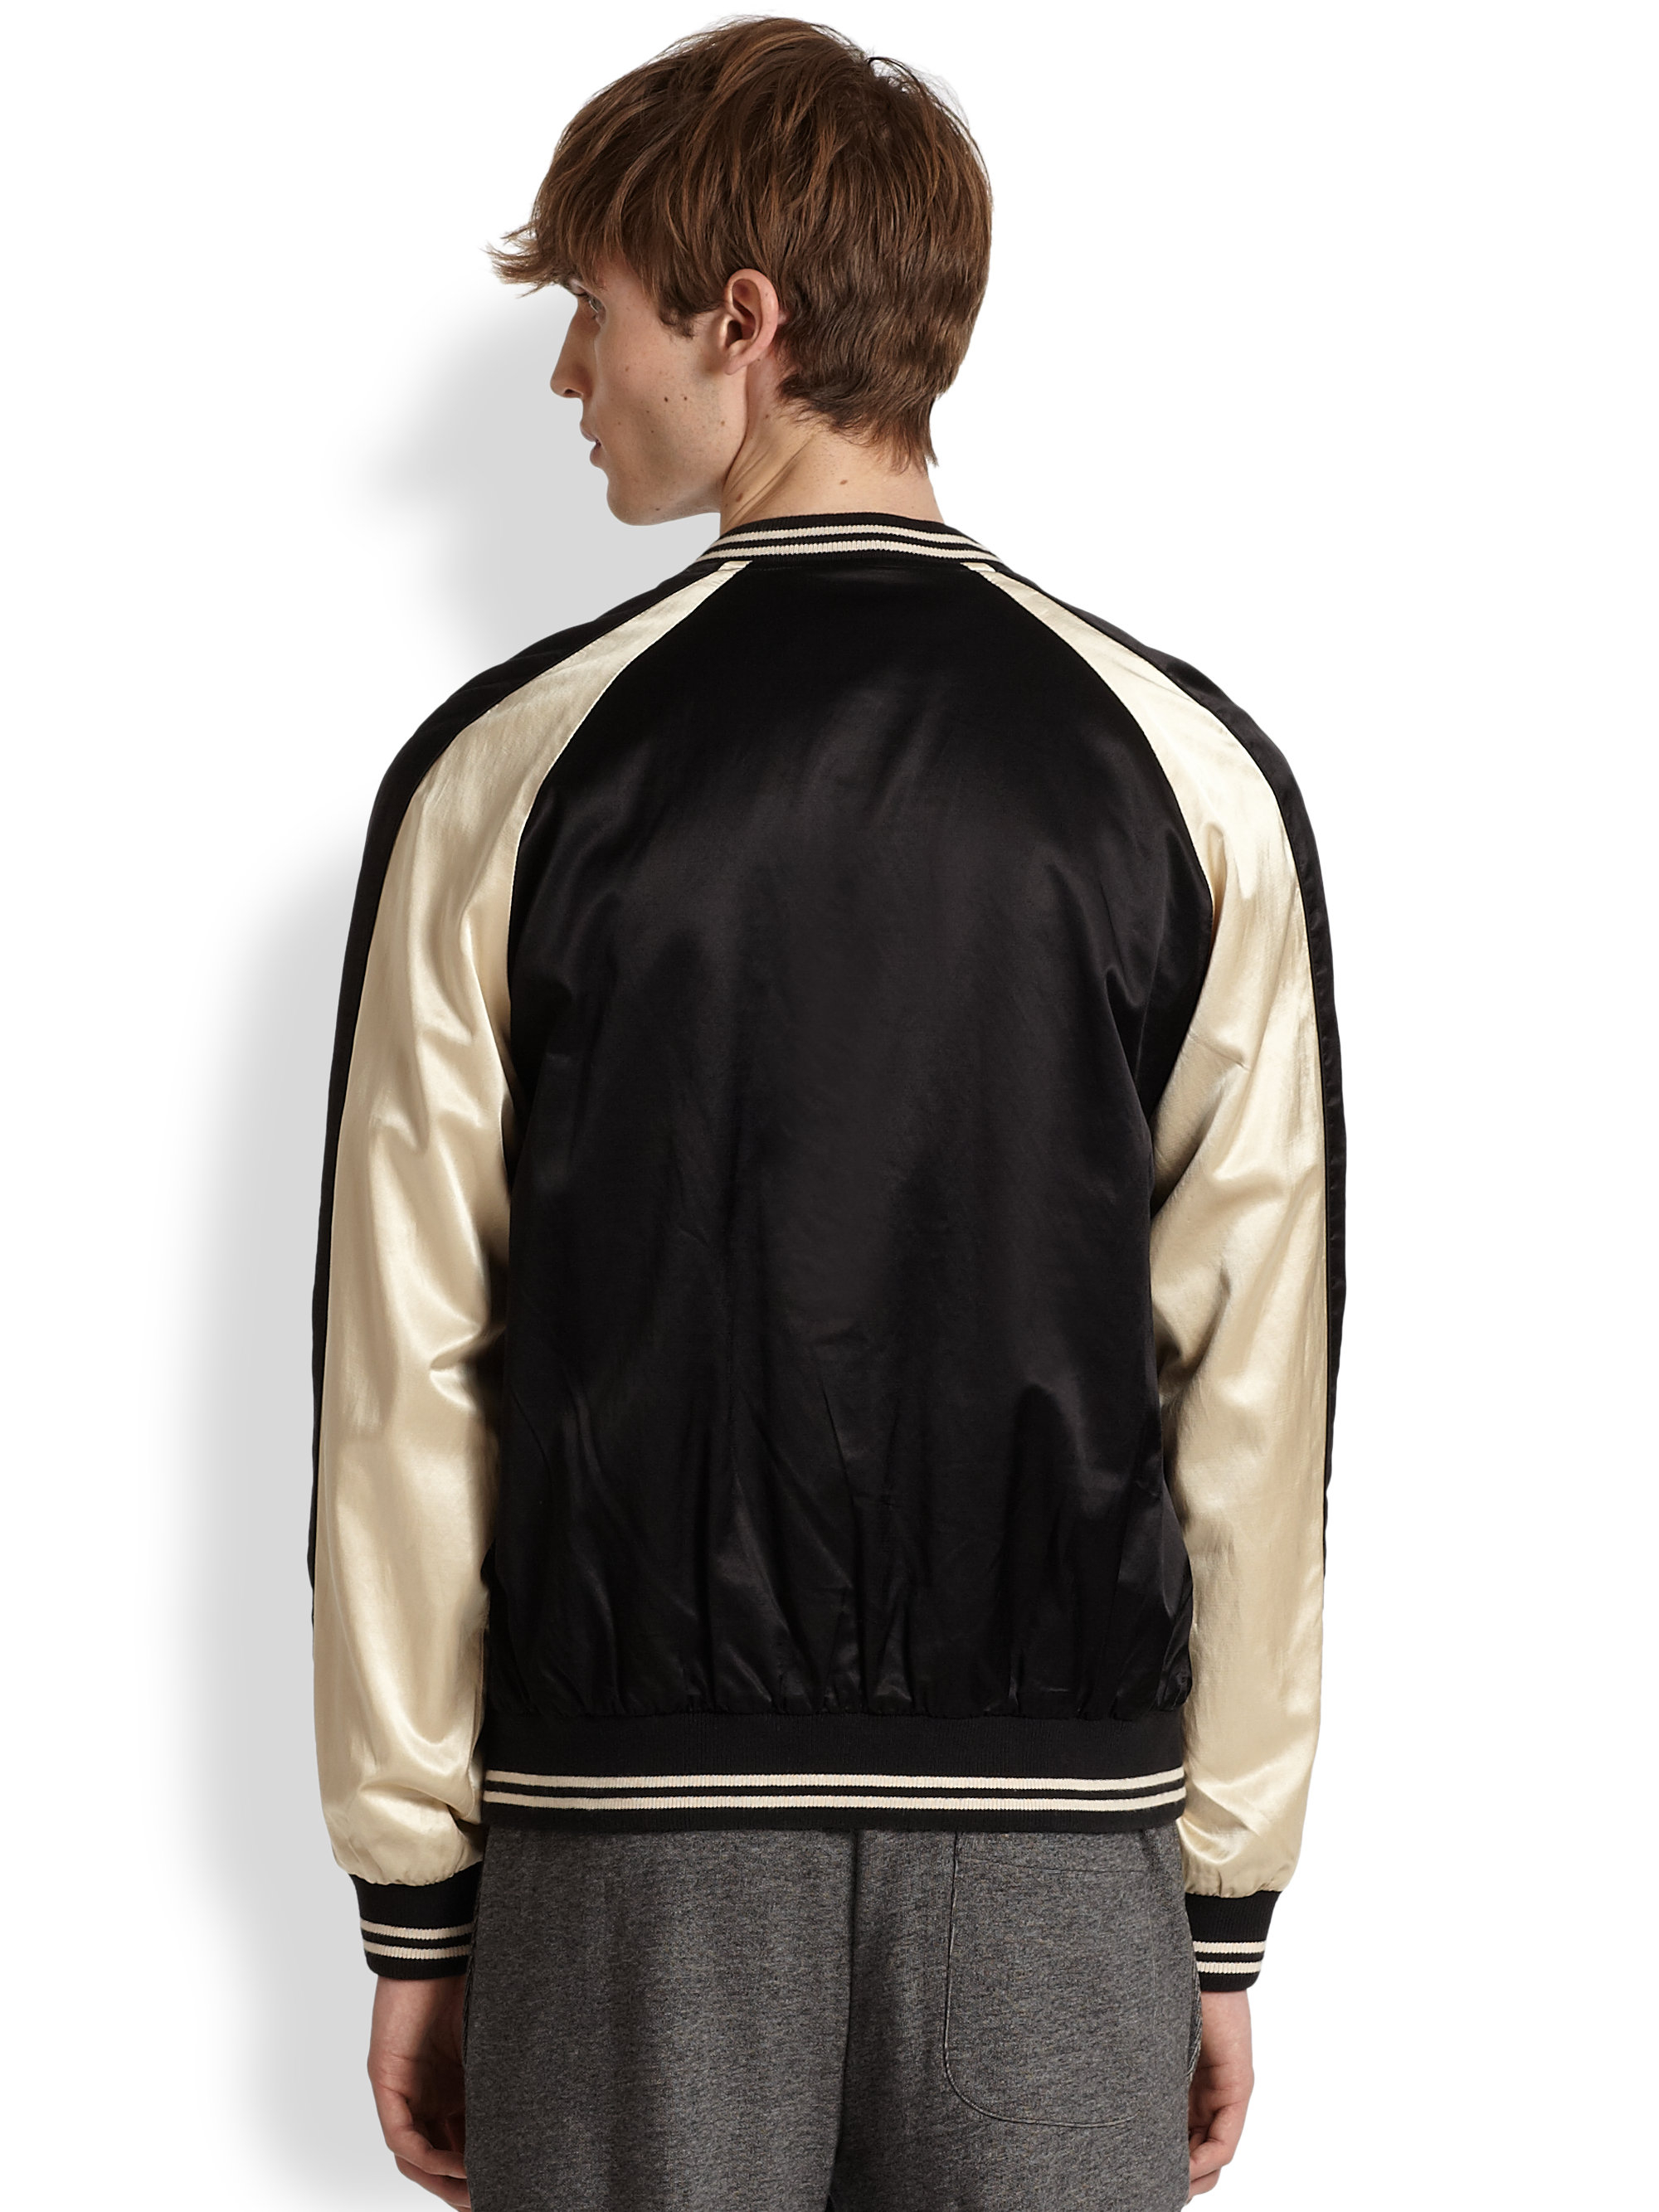 Marc By Marc Jacobs Washed Satin Bomber Jacket in Black for Men - Lyst